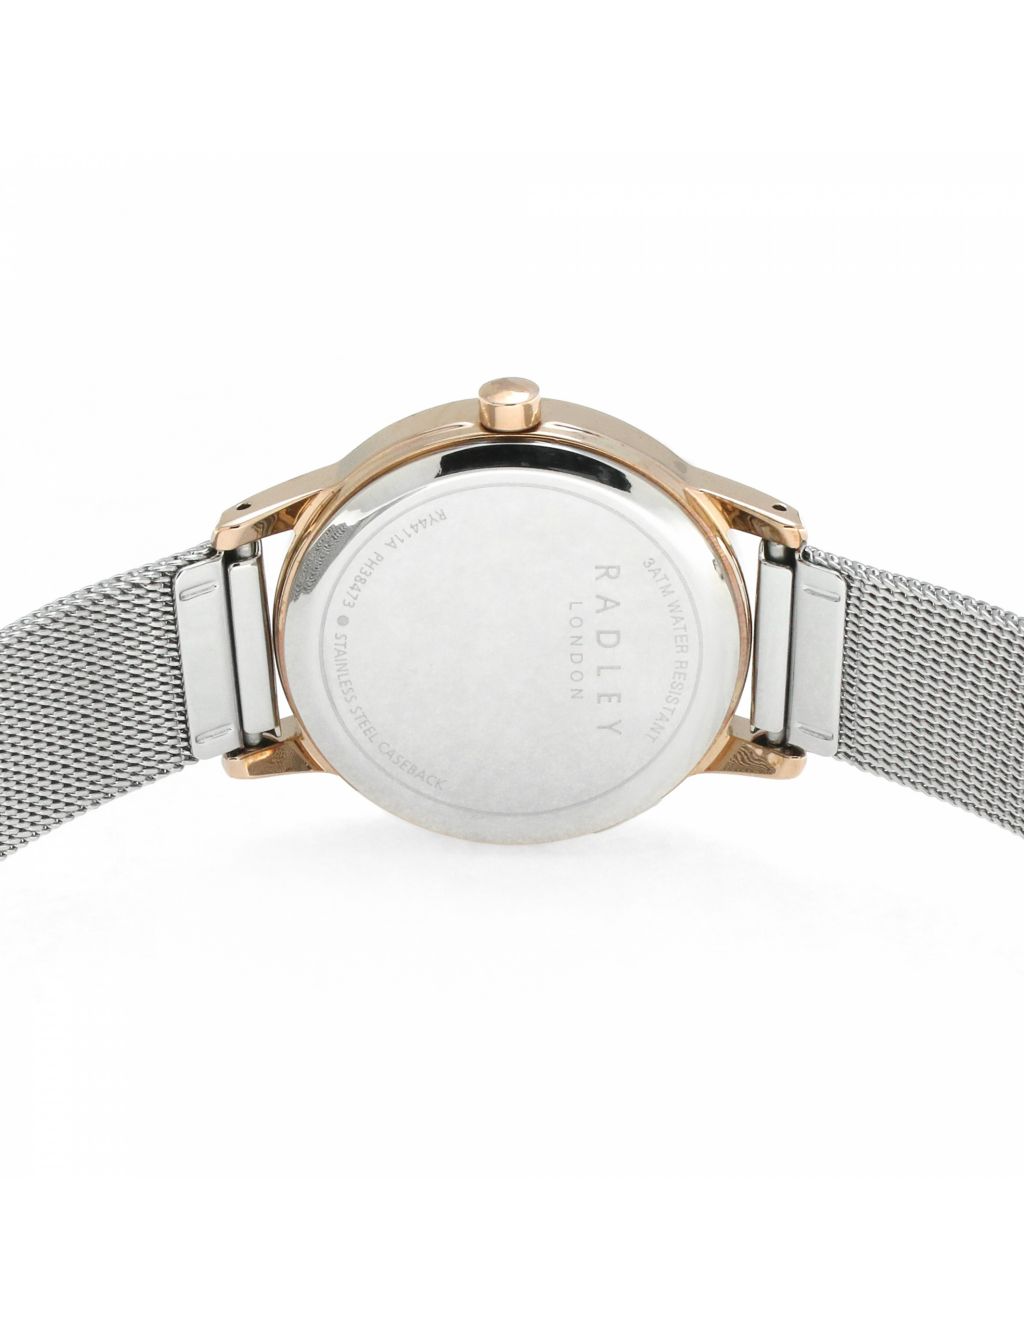 Radley Stainless Steel Watch & Necklace Gift Set image 3